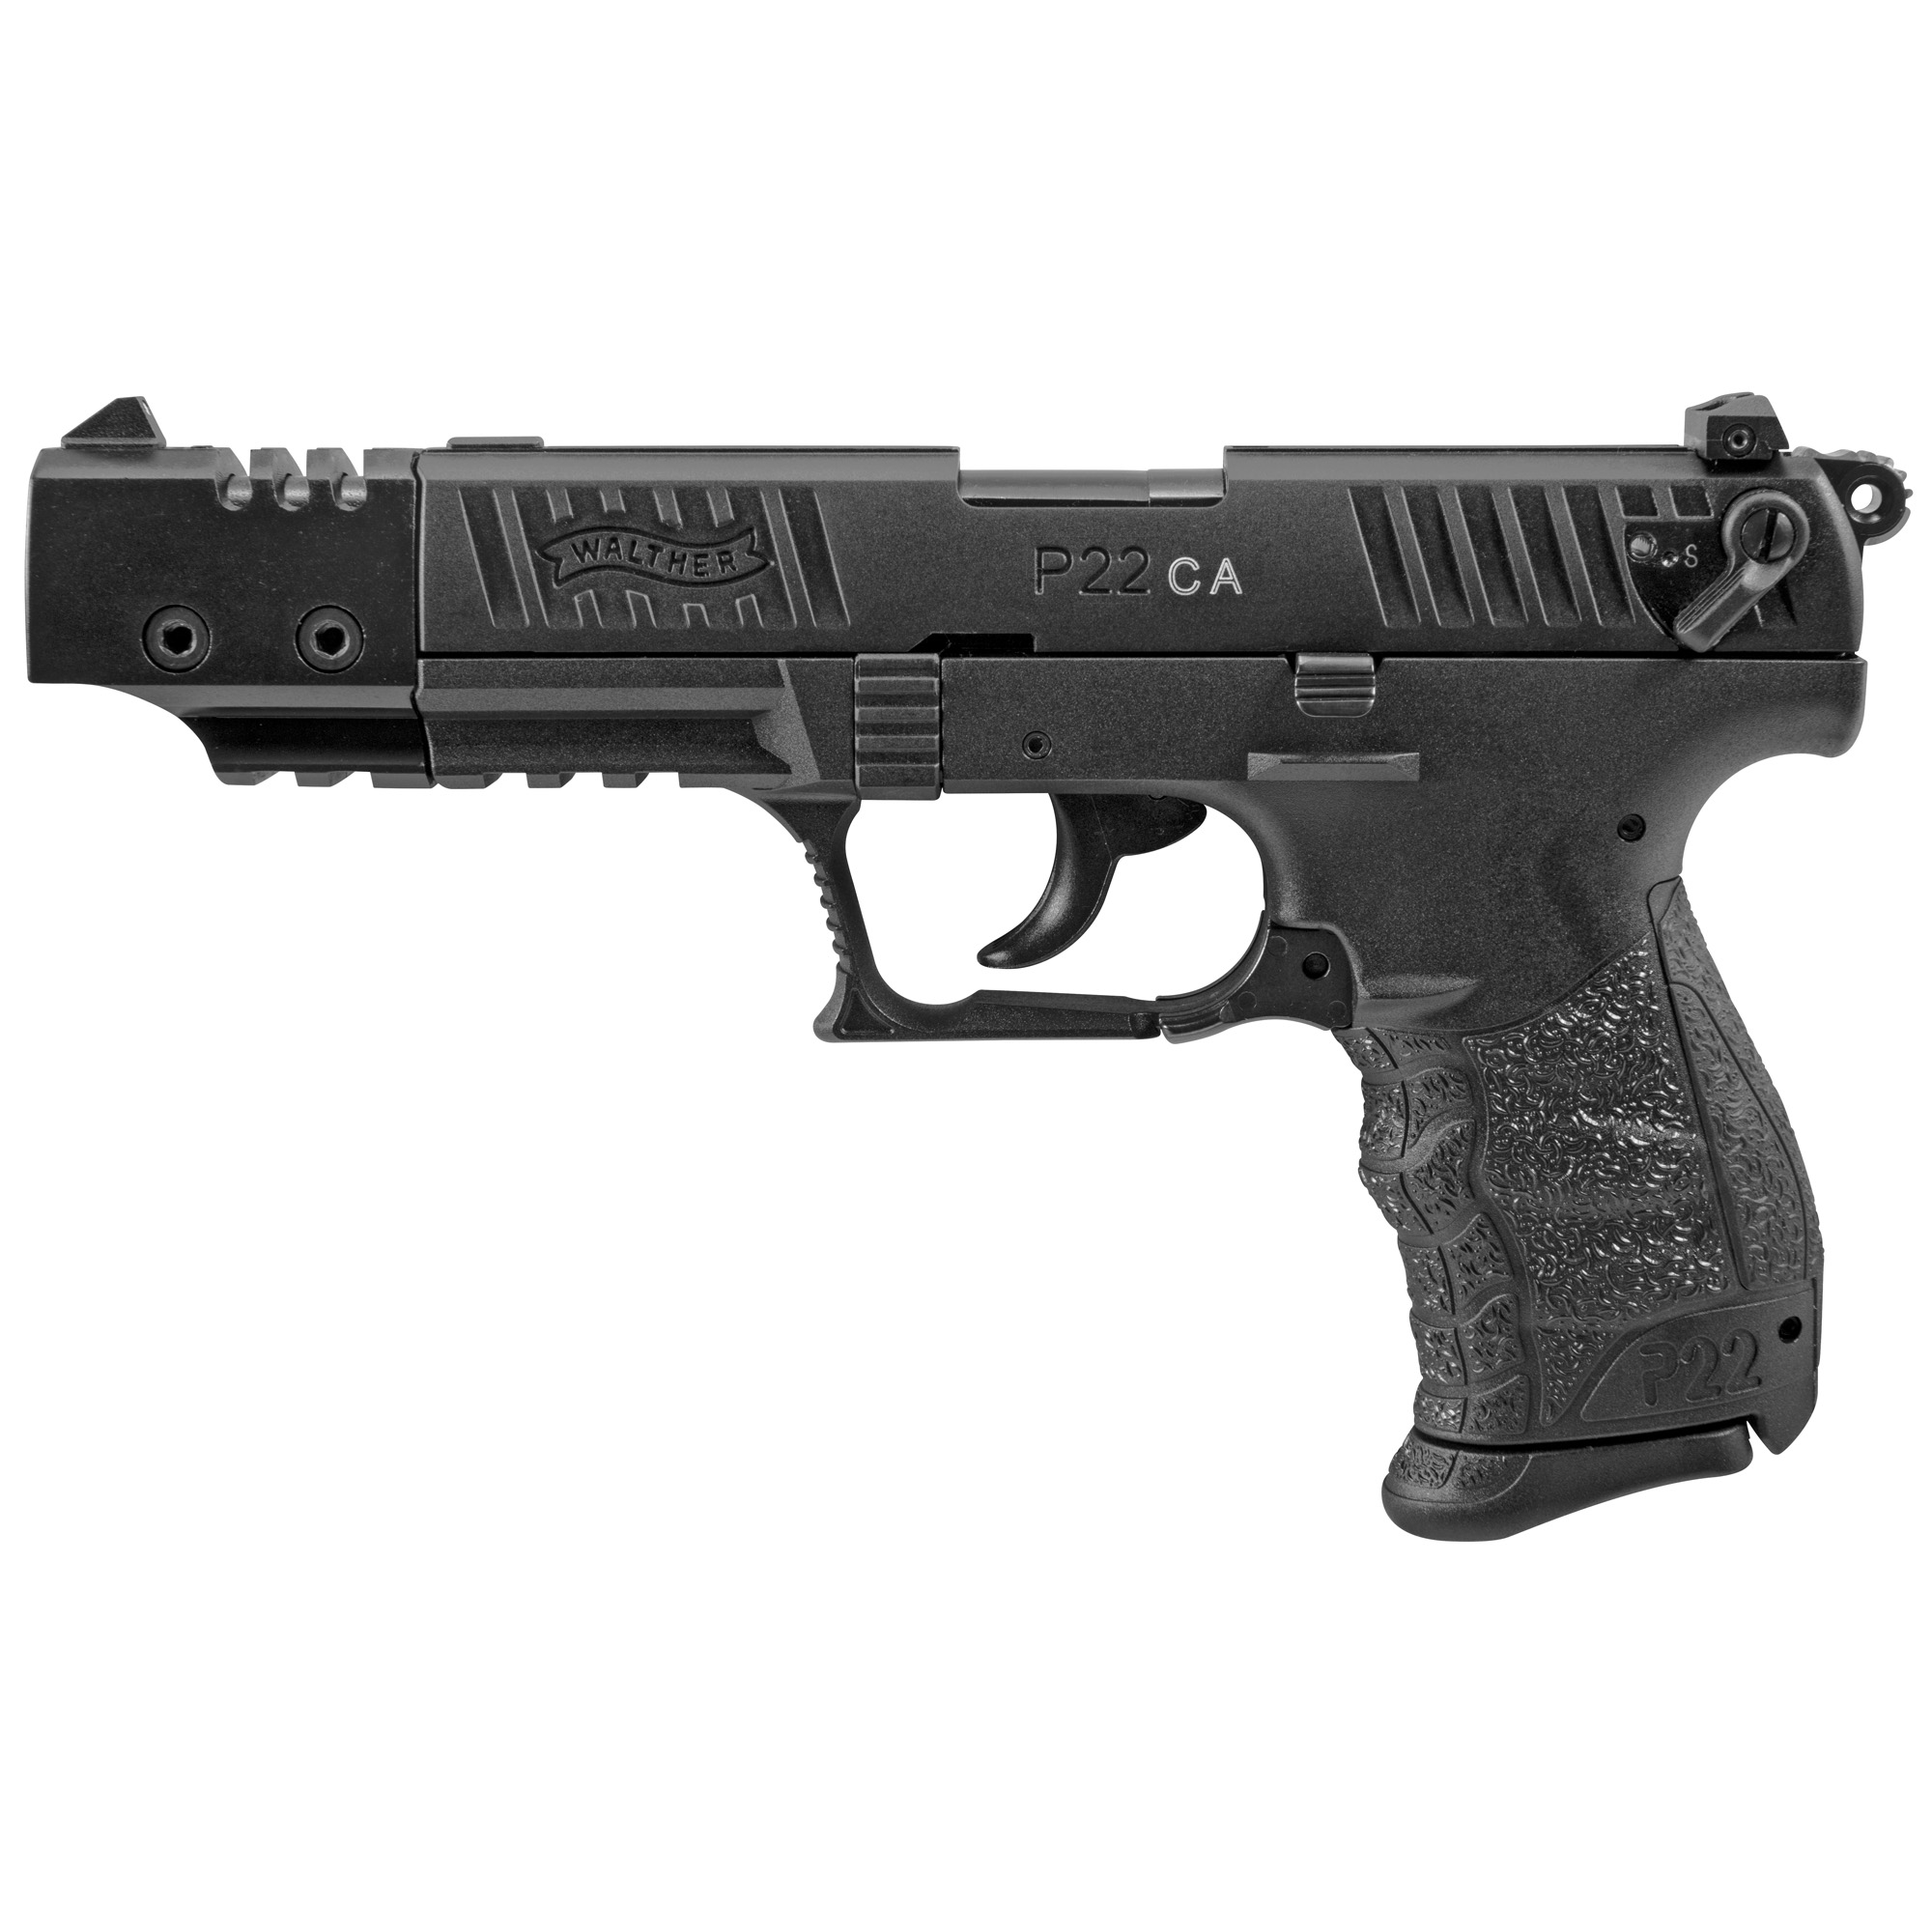 WALTHER P22 22LR 5 10RD BLACK TRGT CA